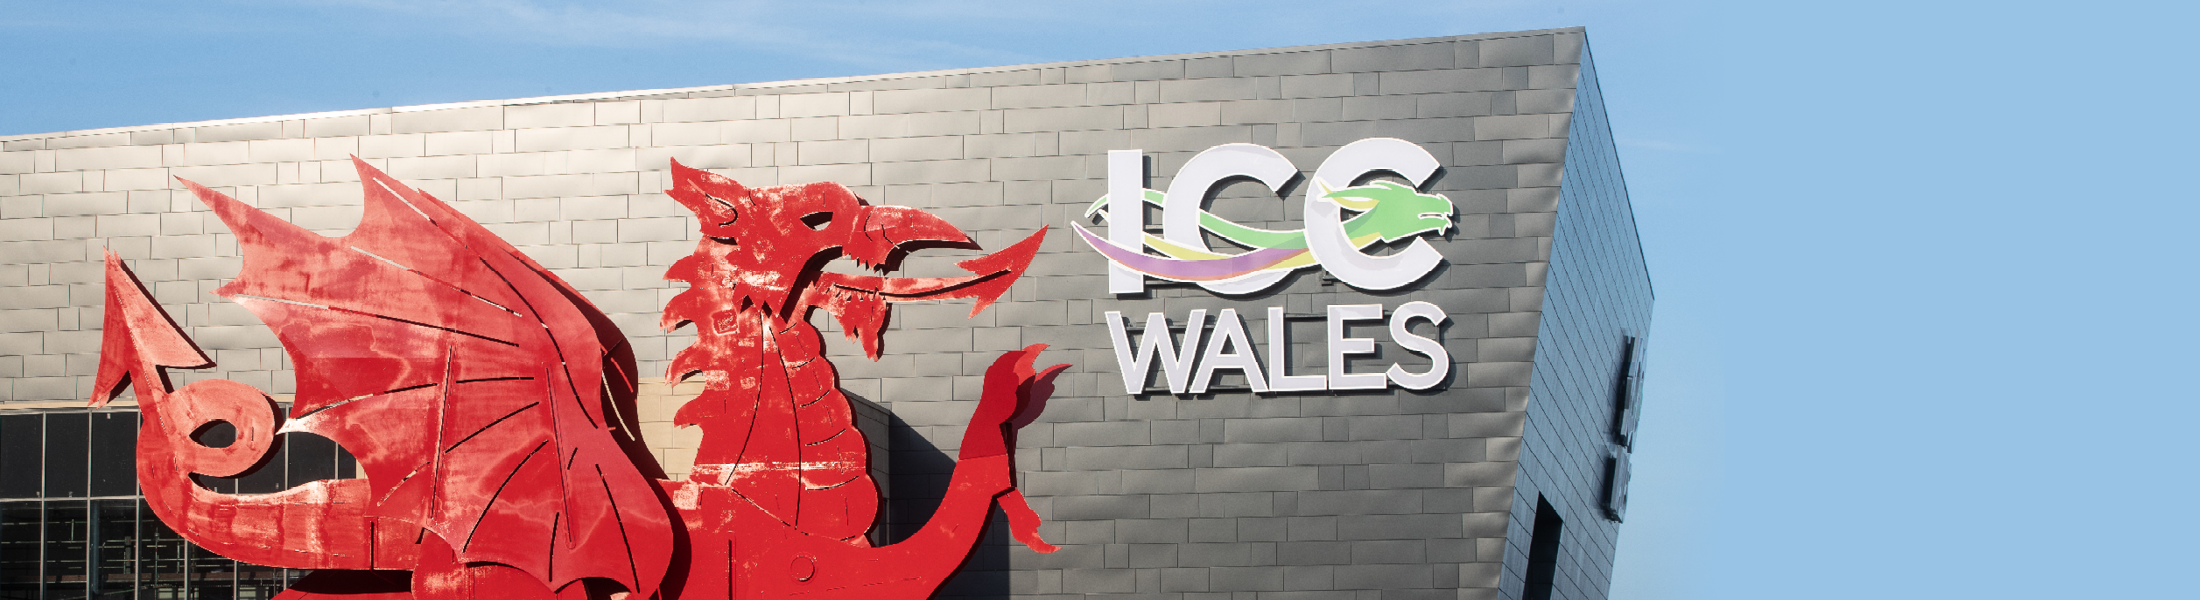 The ICC Wales